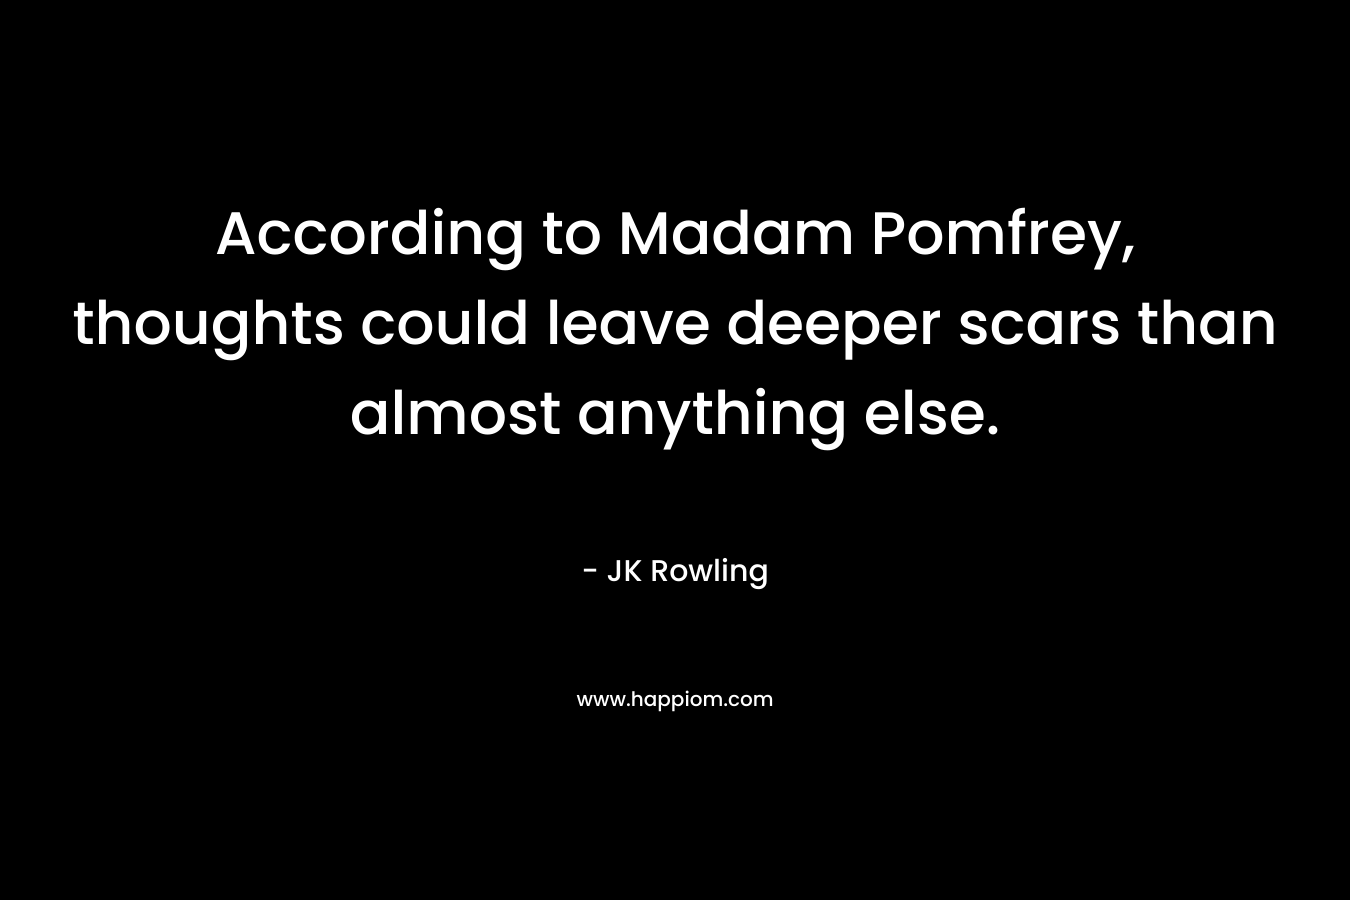 According to Madam Pomfrey, thoughts could leave deeper scars than almost anything else.